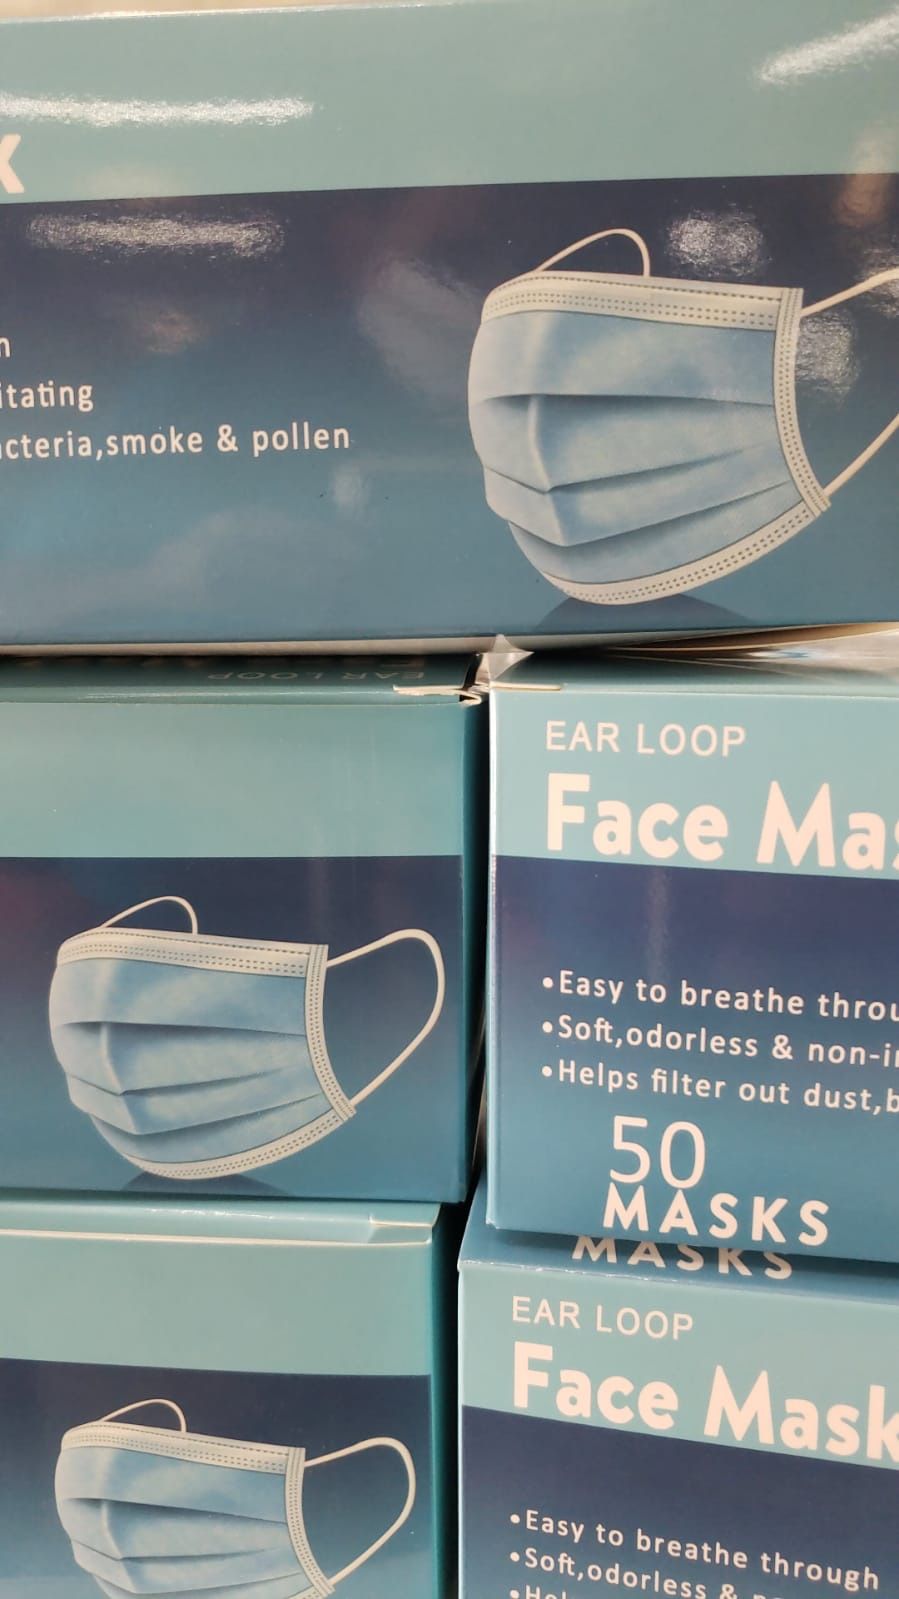 Face mask 3Ply $7.00 - BOX of 50